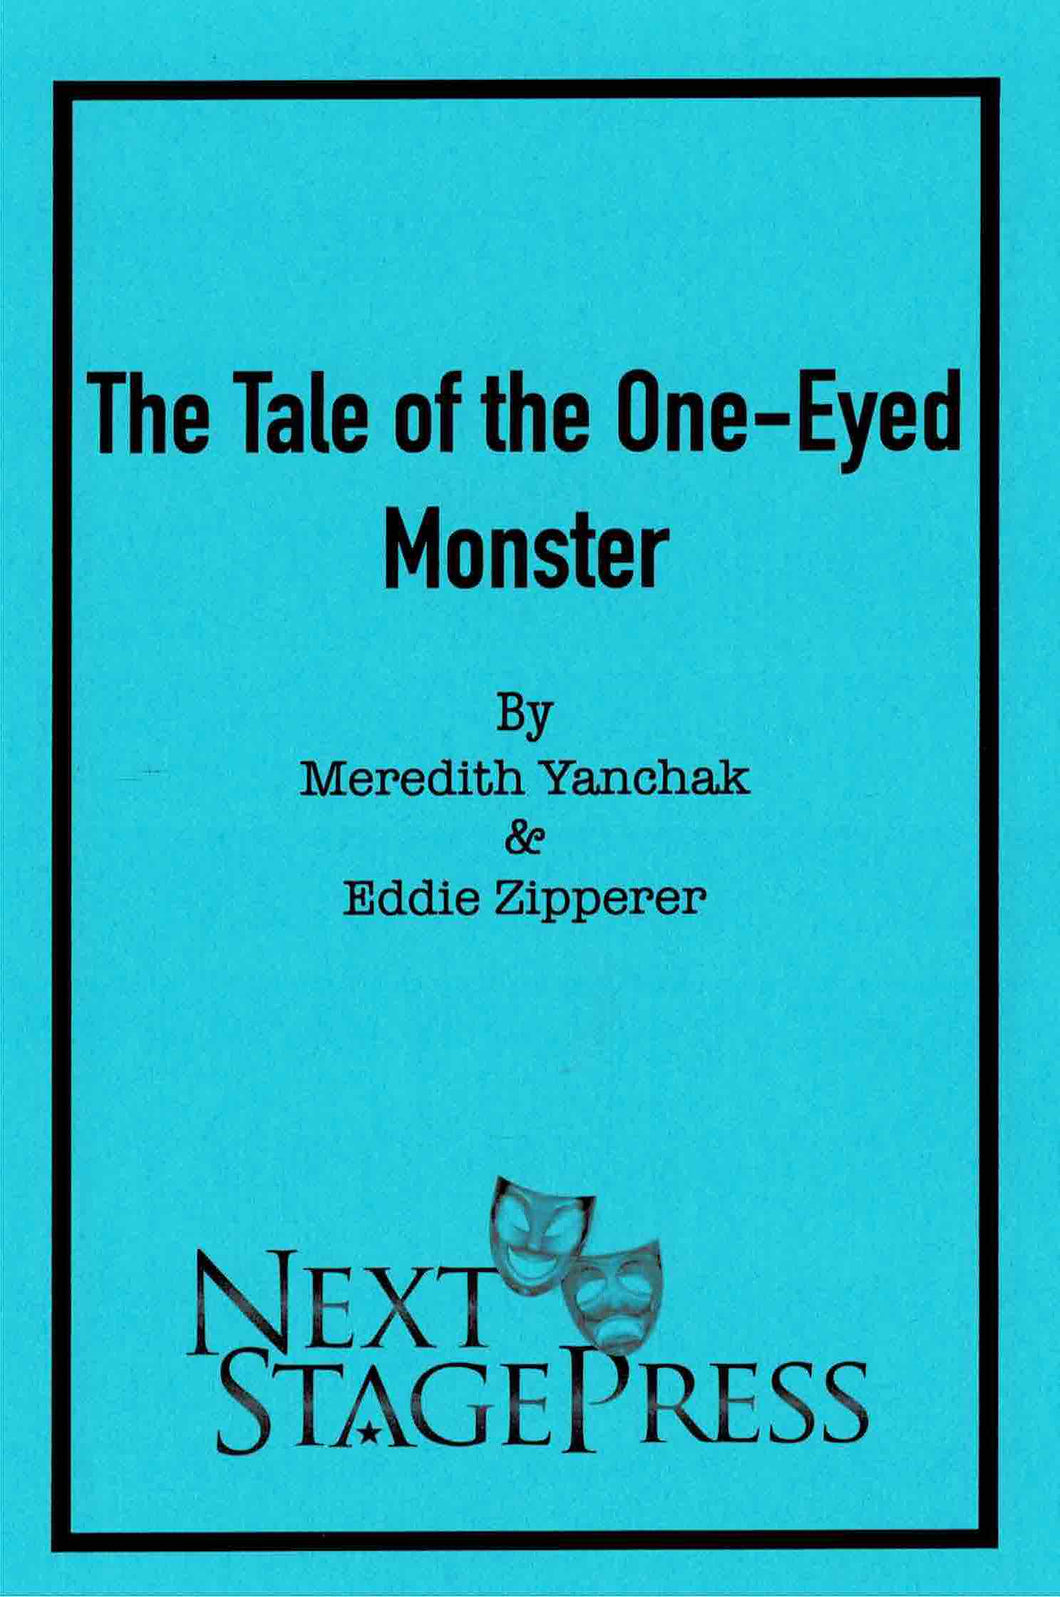 The Tale of the One-Eyed Monster - Digital Version